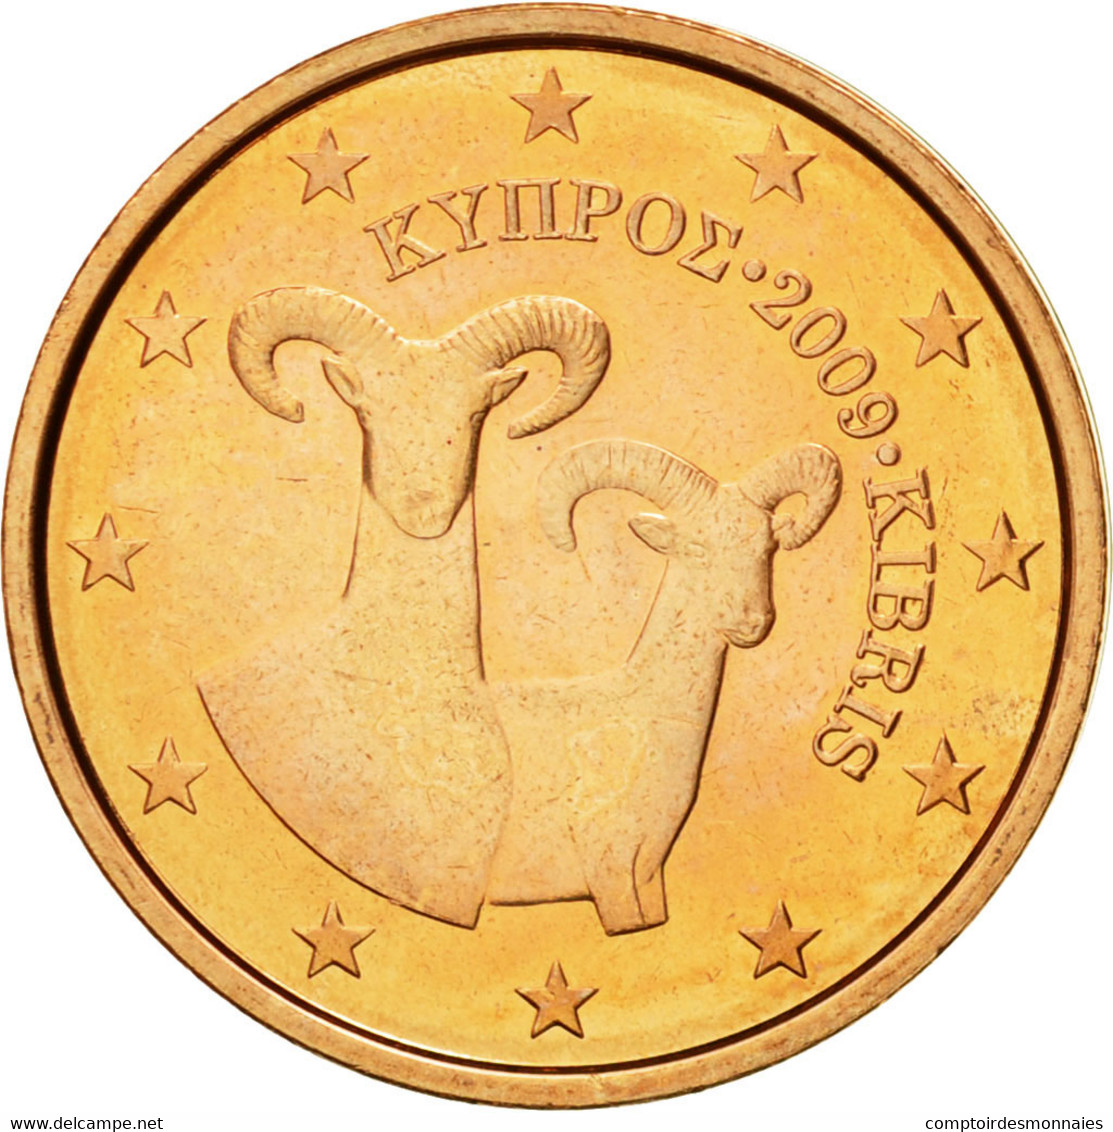 Chypre, 2 Euro Cent, 2009, FDC, Copper Plated Steel, KM:79 - Chypre